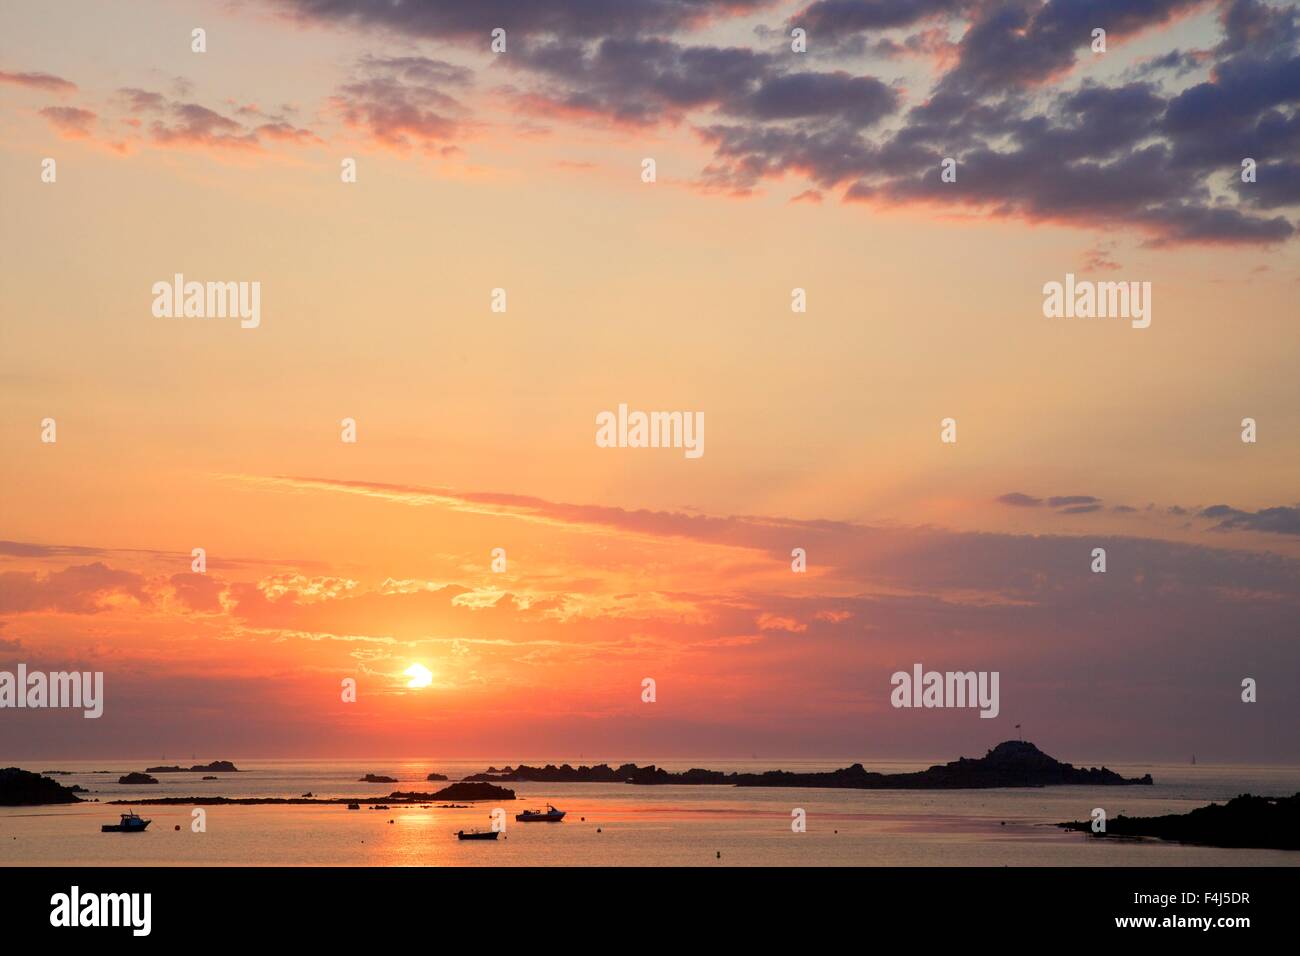 Sunset at Cobo Bay, Guernsey, Channel Islands, United Kingdom, Europe Stock Photo